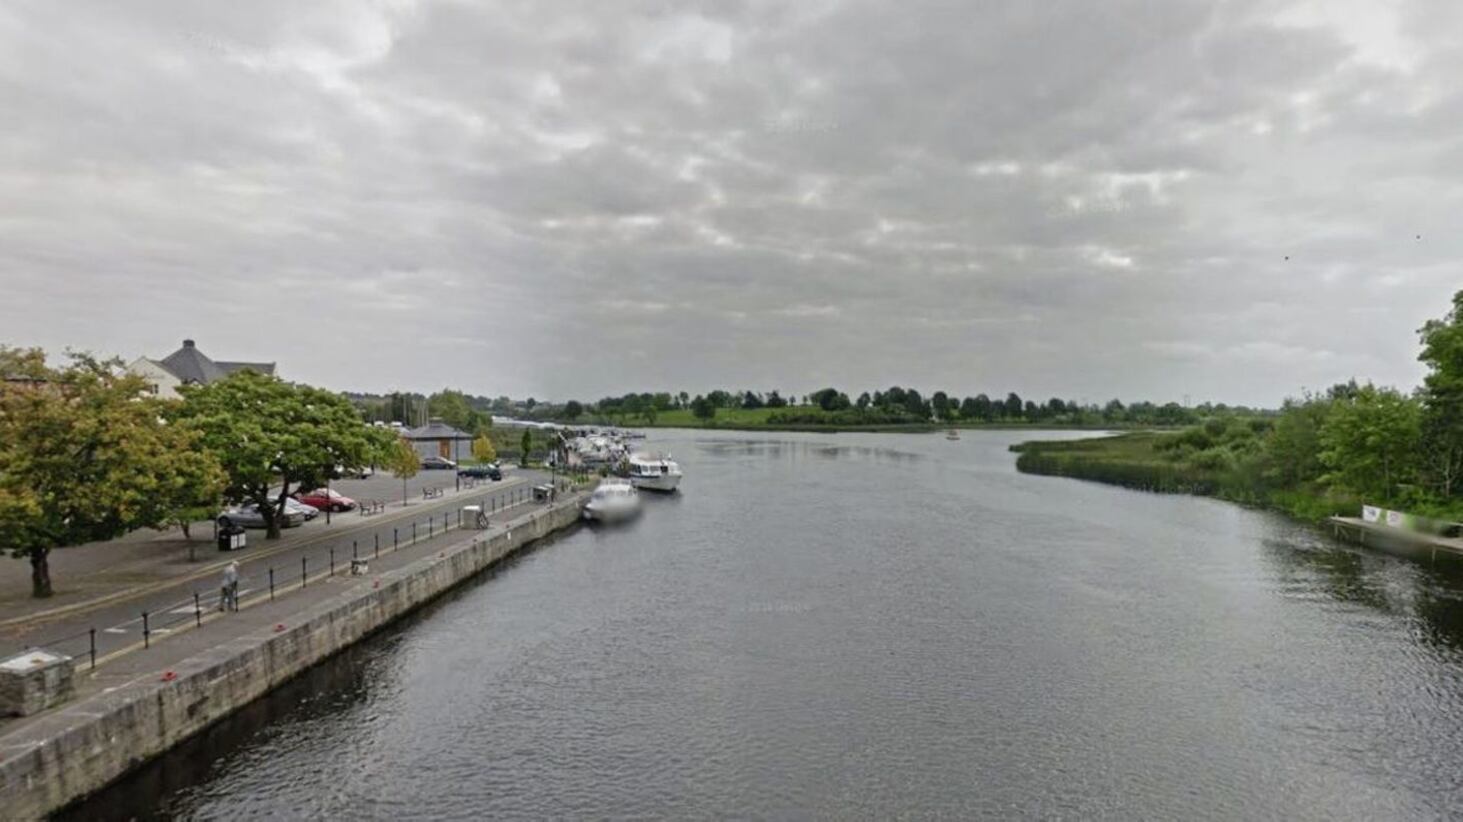 The bodies of the man and woman were recovered from the River Shannon at Carrick-on-Shannon in Co Leitrim 